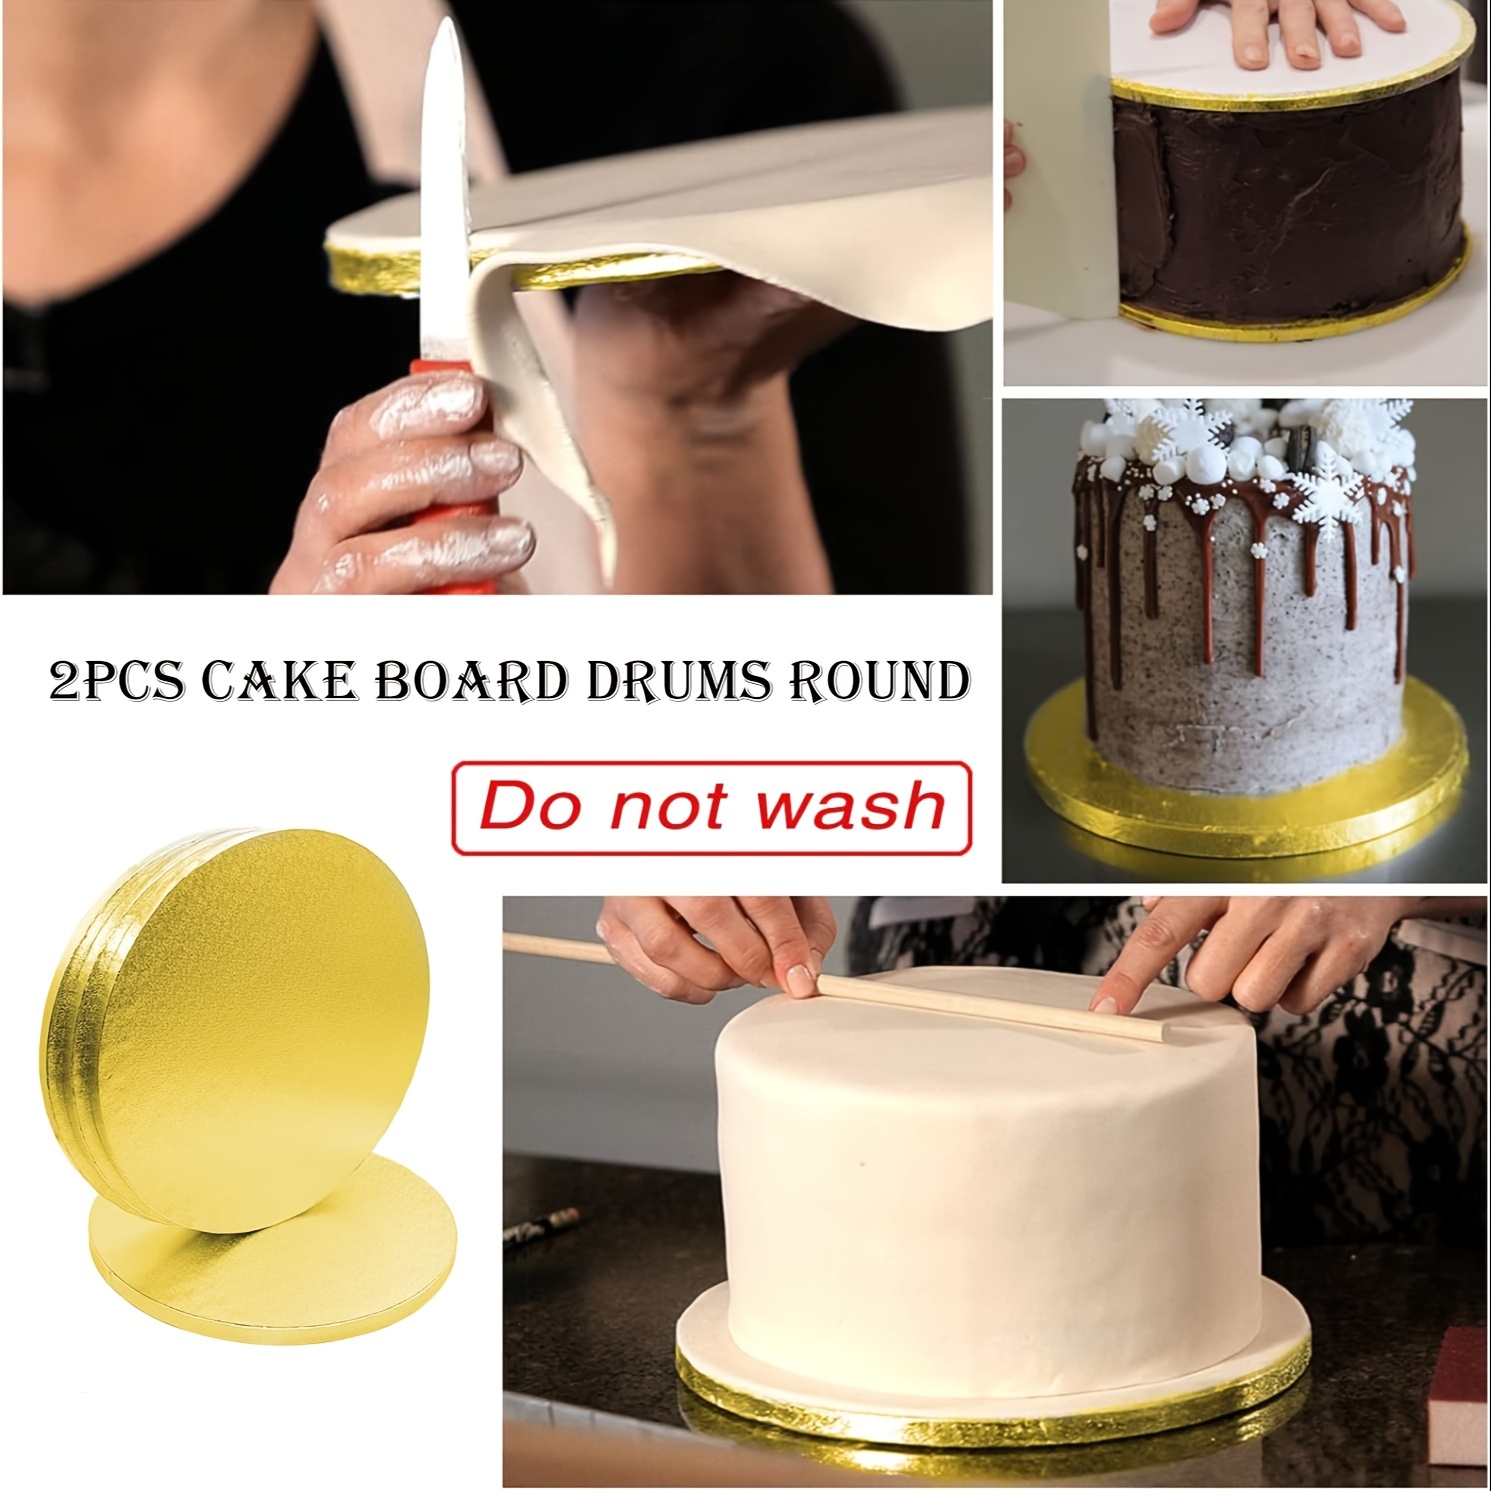 

2pcs Cake Drums Round 10/12 Inch Cake Boards With 1/2-inch Thick Smooth Edges For Multi Tiered Birthday Wedding Party Cakes Drum Board Baking Supplies Halloween Christmas Party Favors